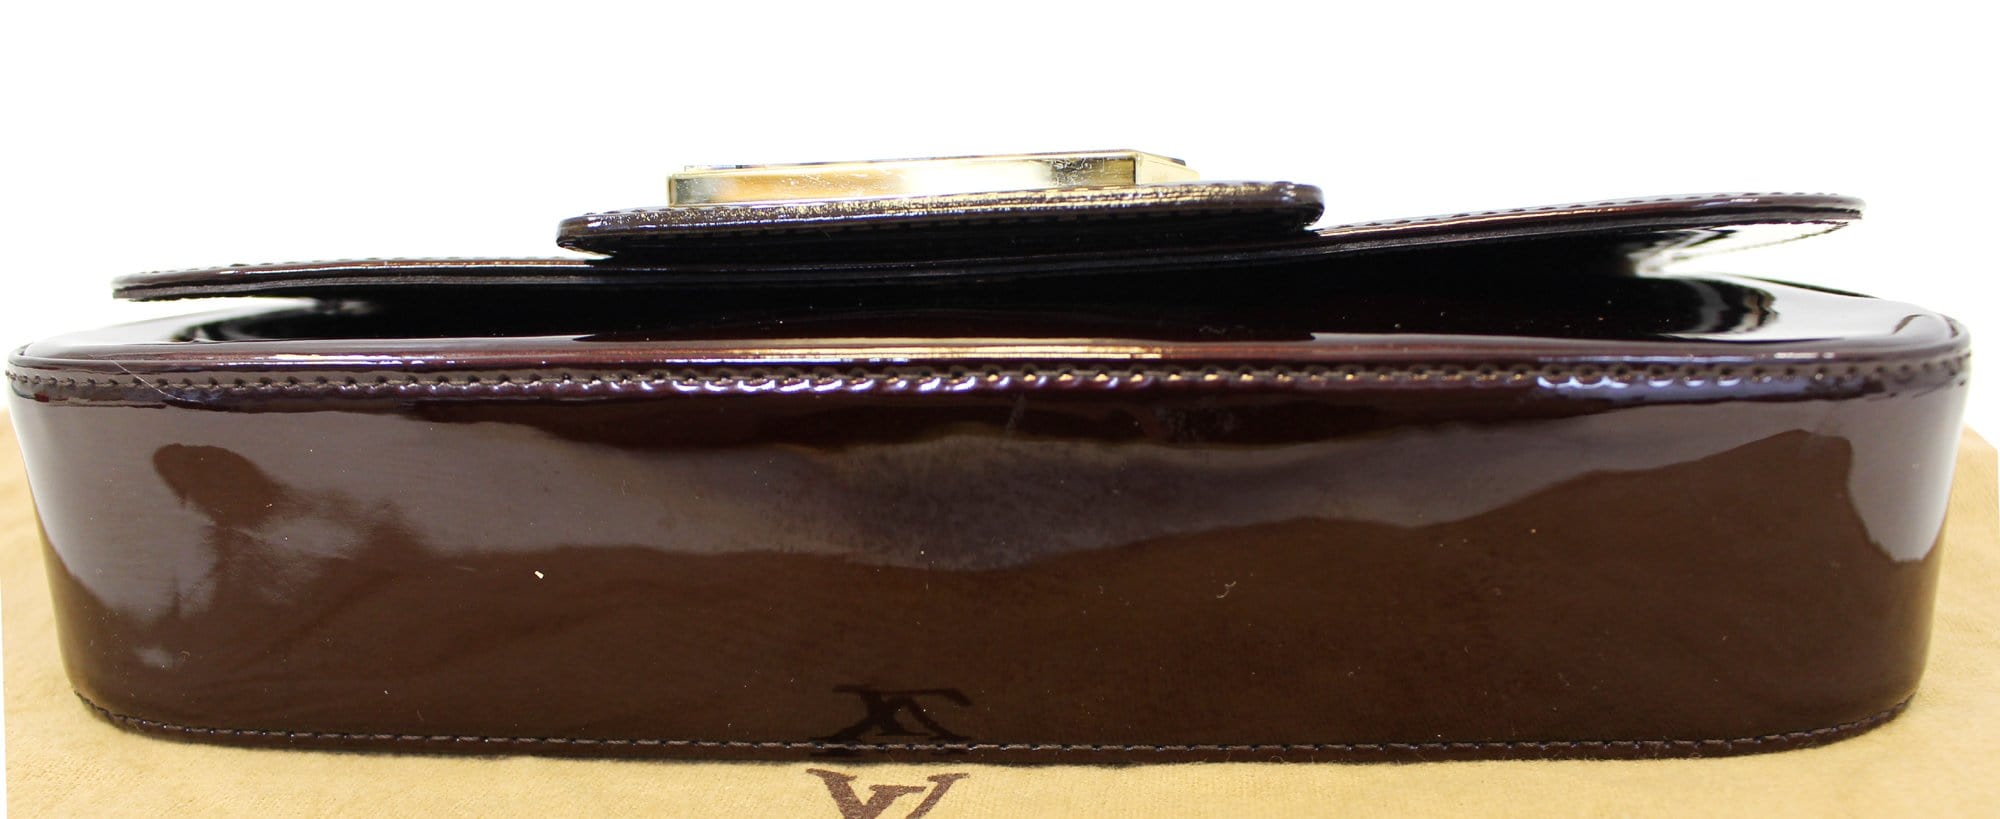 LV Sobe patent leather clutch vernis, Bags